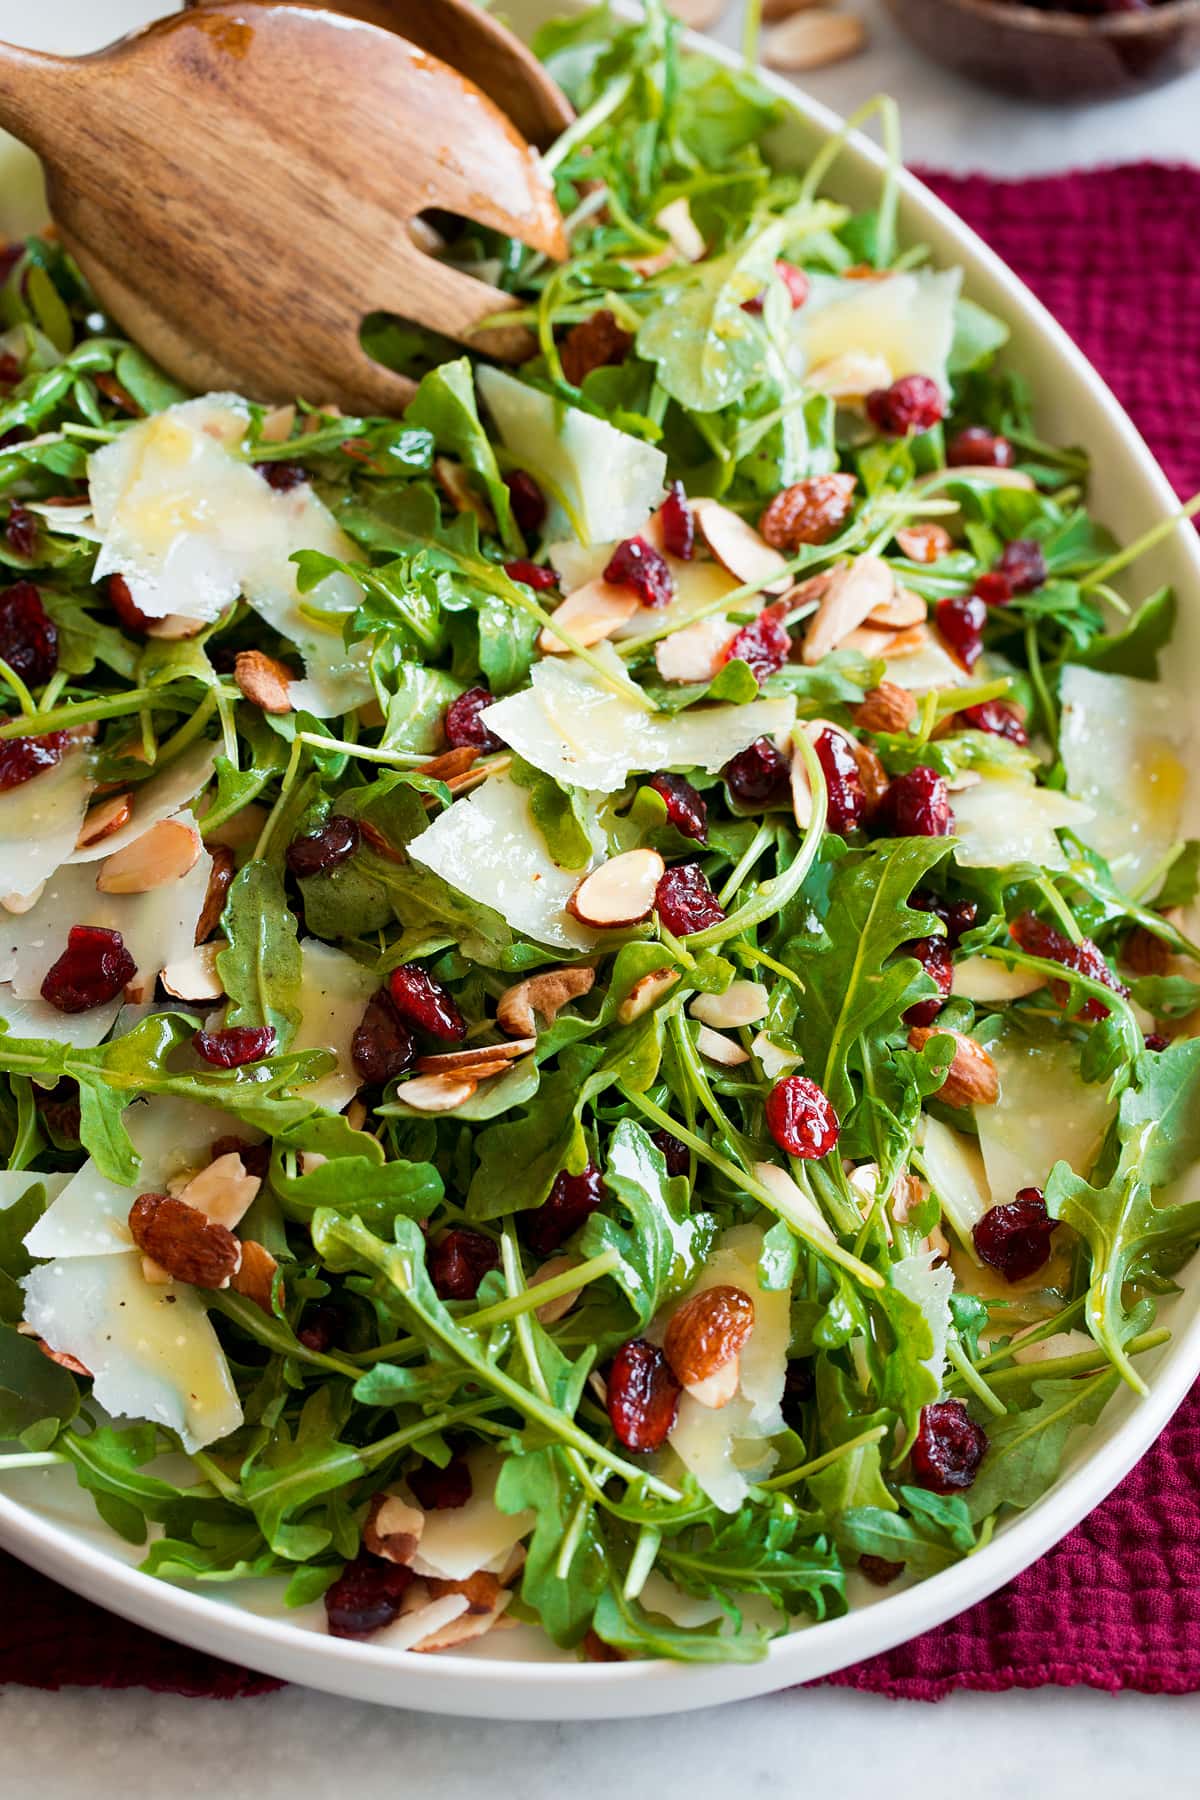 Arugula salad shown with salad serving spoons scooping salad.